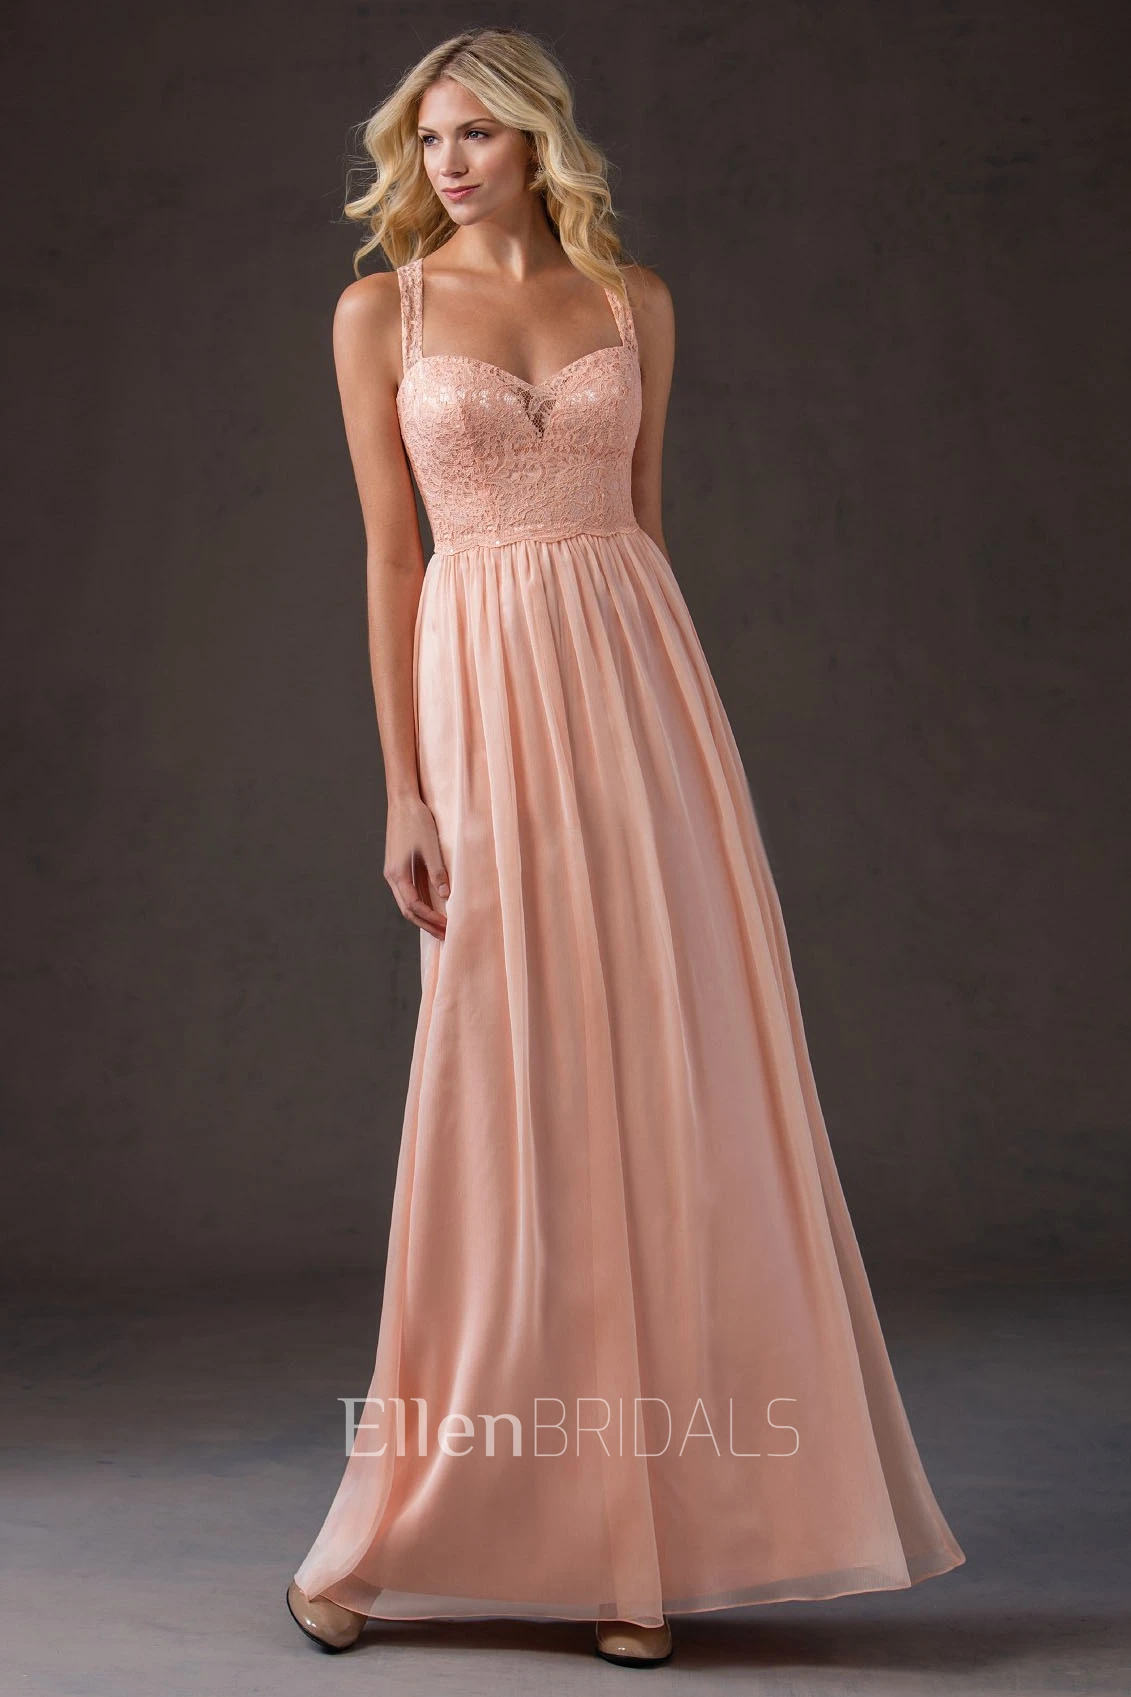 A-Line Straps Floor-length Chiffon Bridesmaid Dresses with Illusion